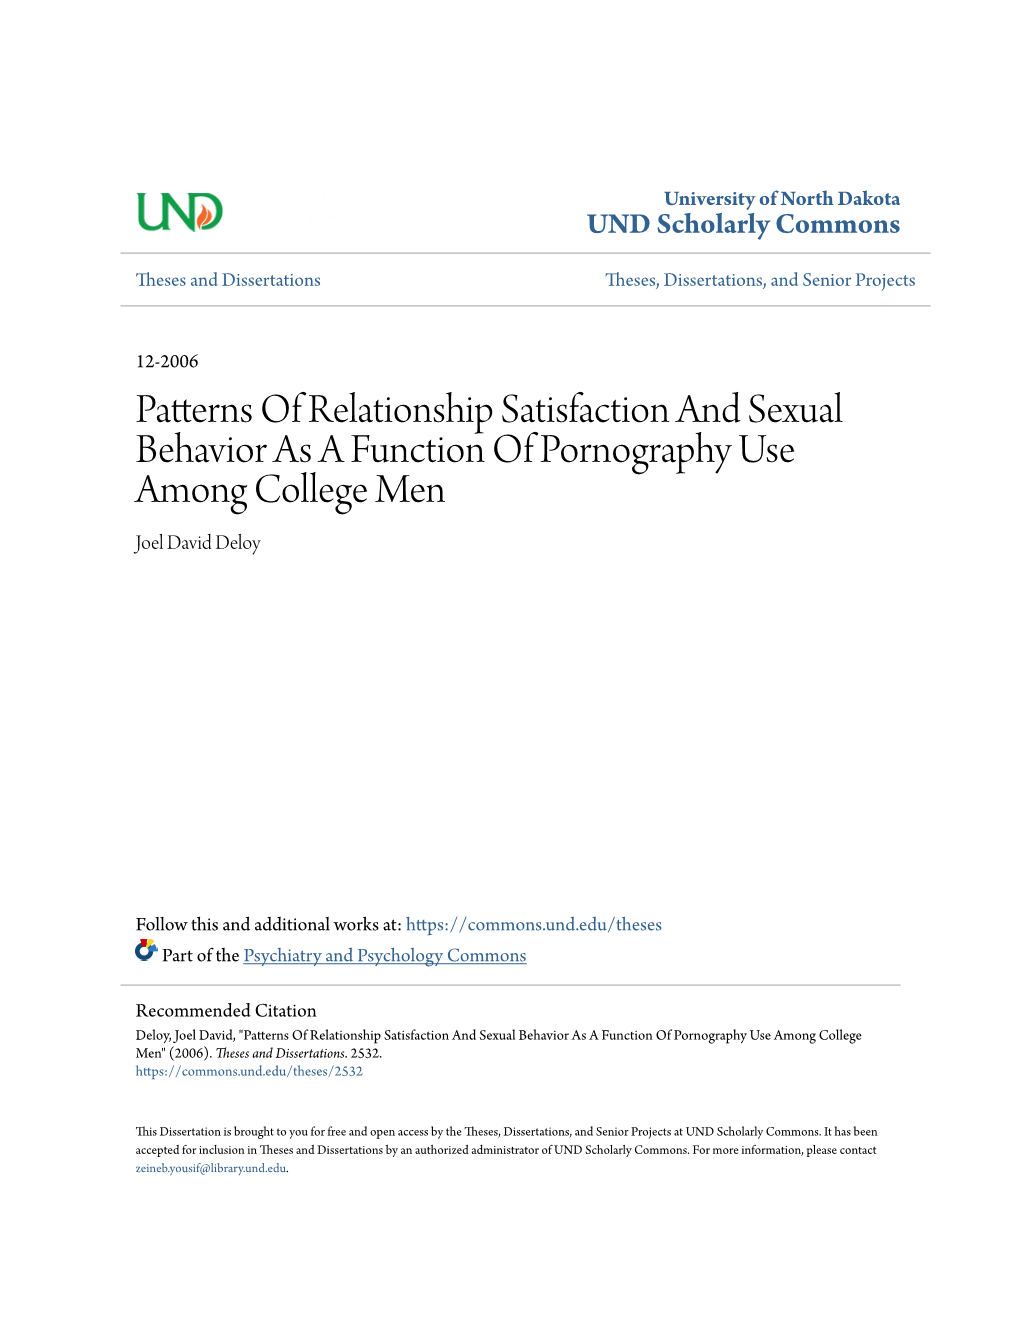 Patterns of Relationship Satisfaction and Sexual Behavior As a Function of Pornography Use Among College Men Joel David Deloy